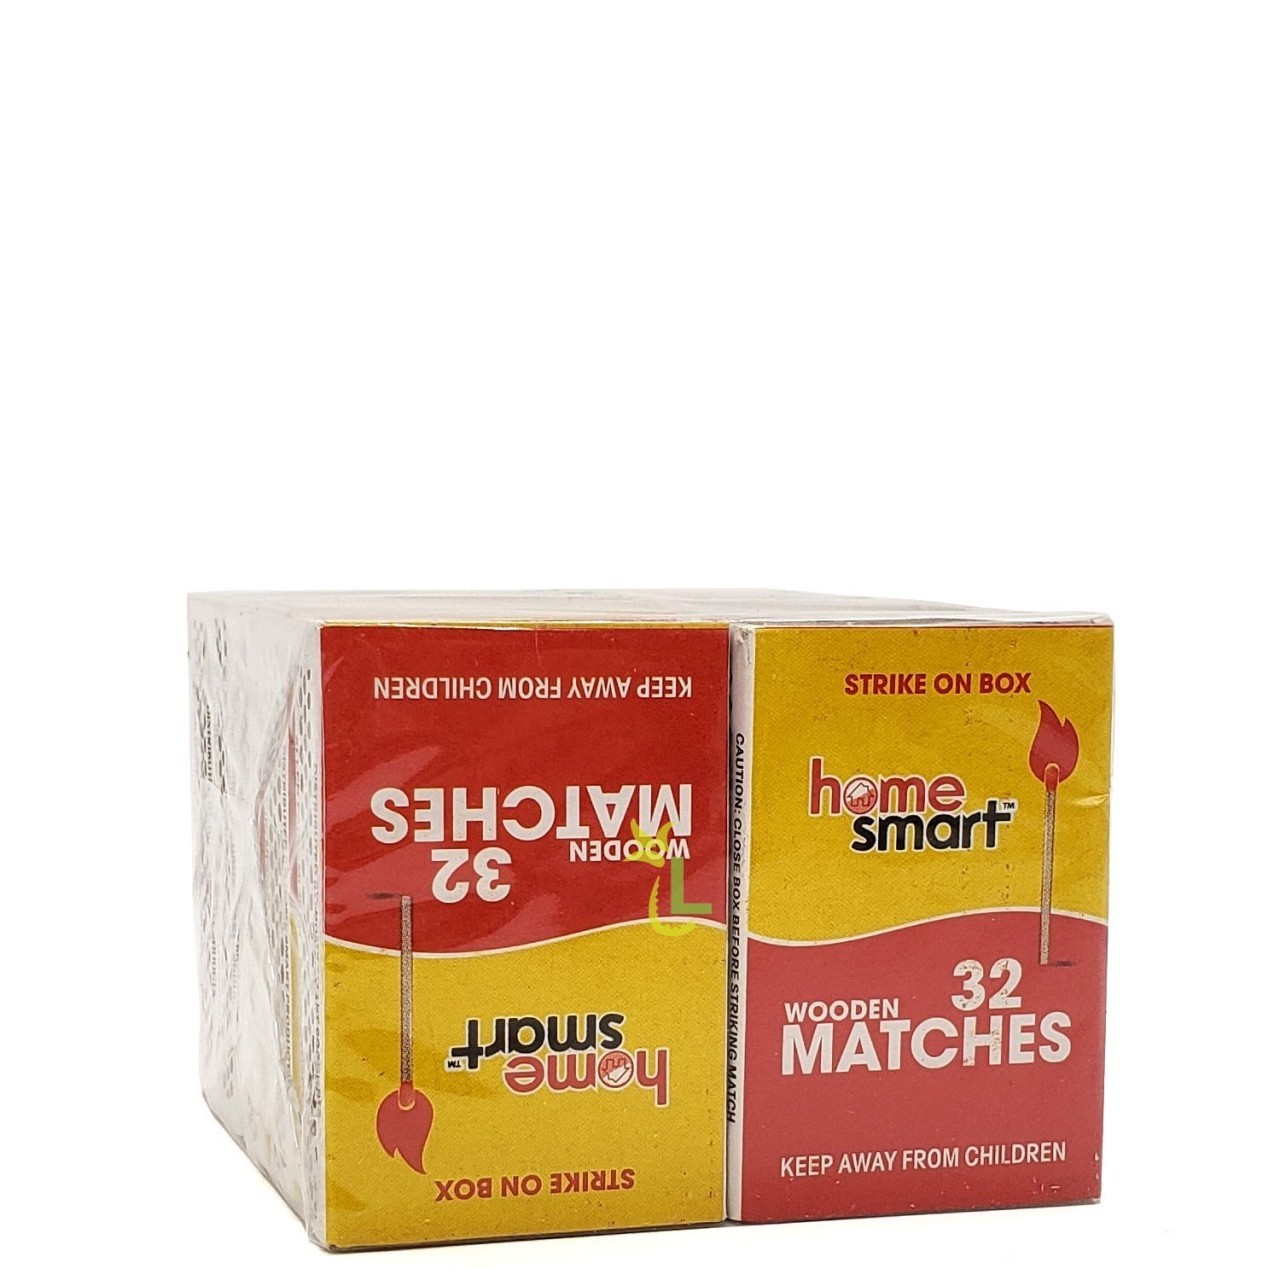 HOME SMART WOODEN MATCHES 10x32s